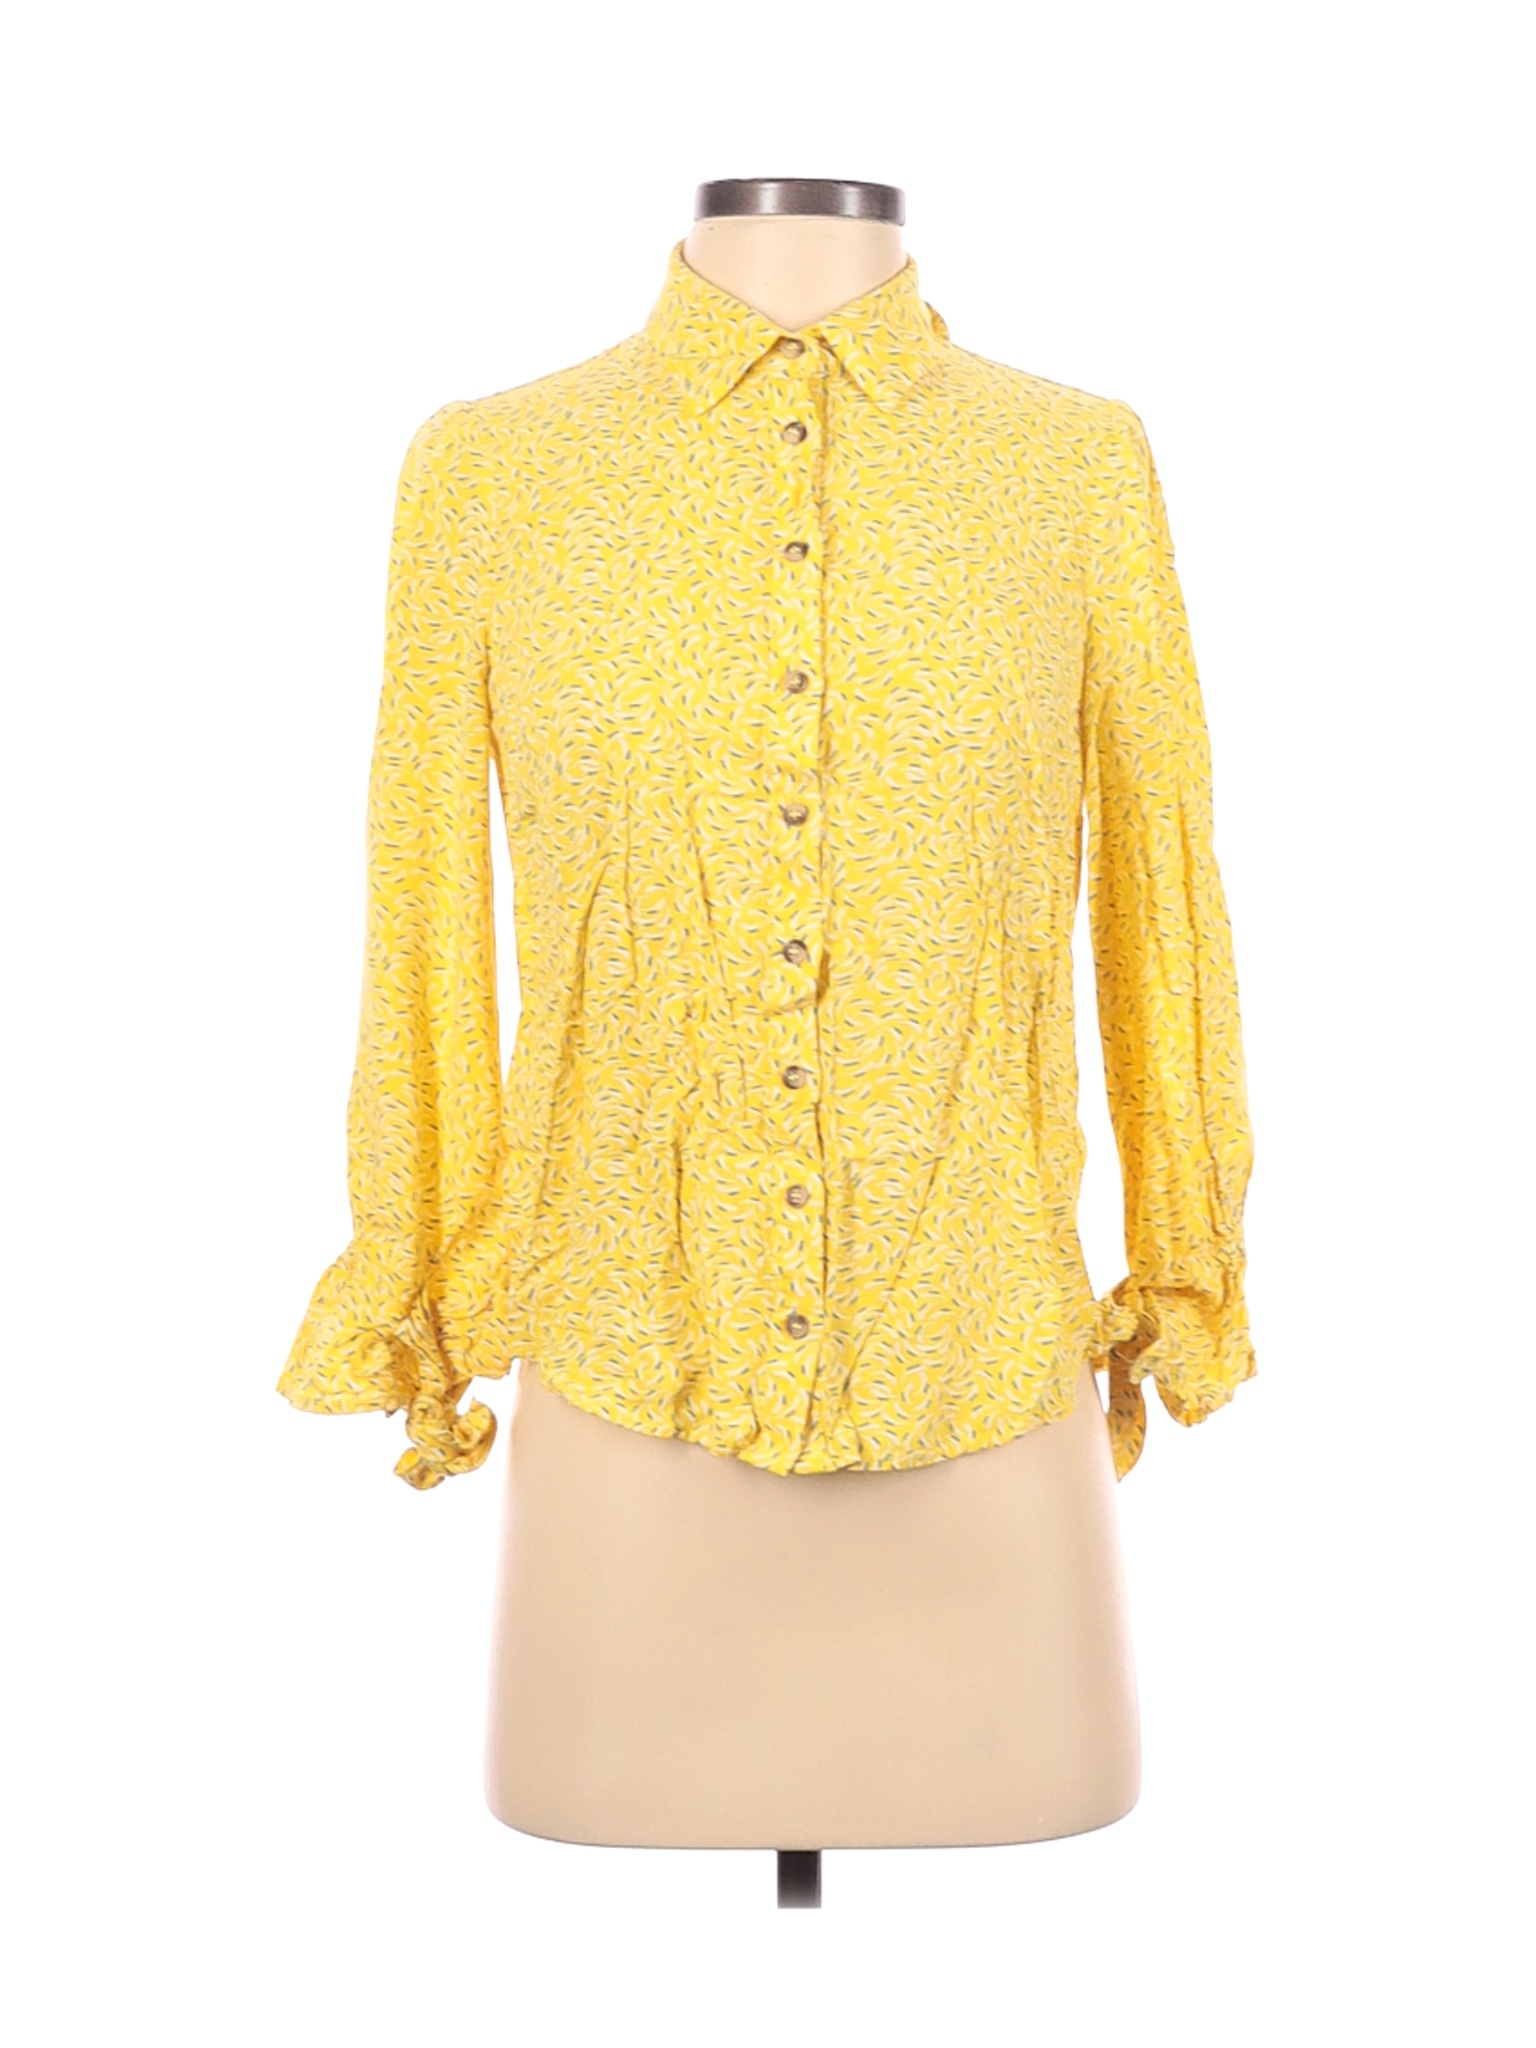 Maeve by Anthropologie Women Yellow Long Sleeve Button-Down Shirt 2 | eBay